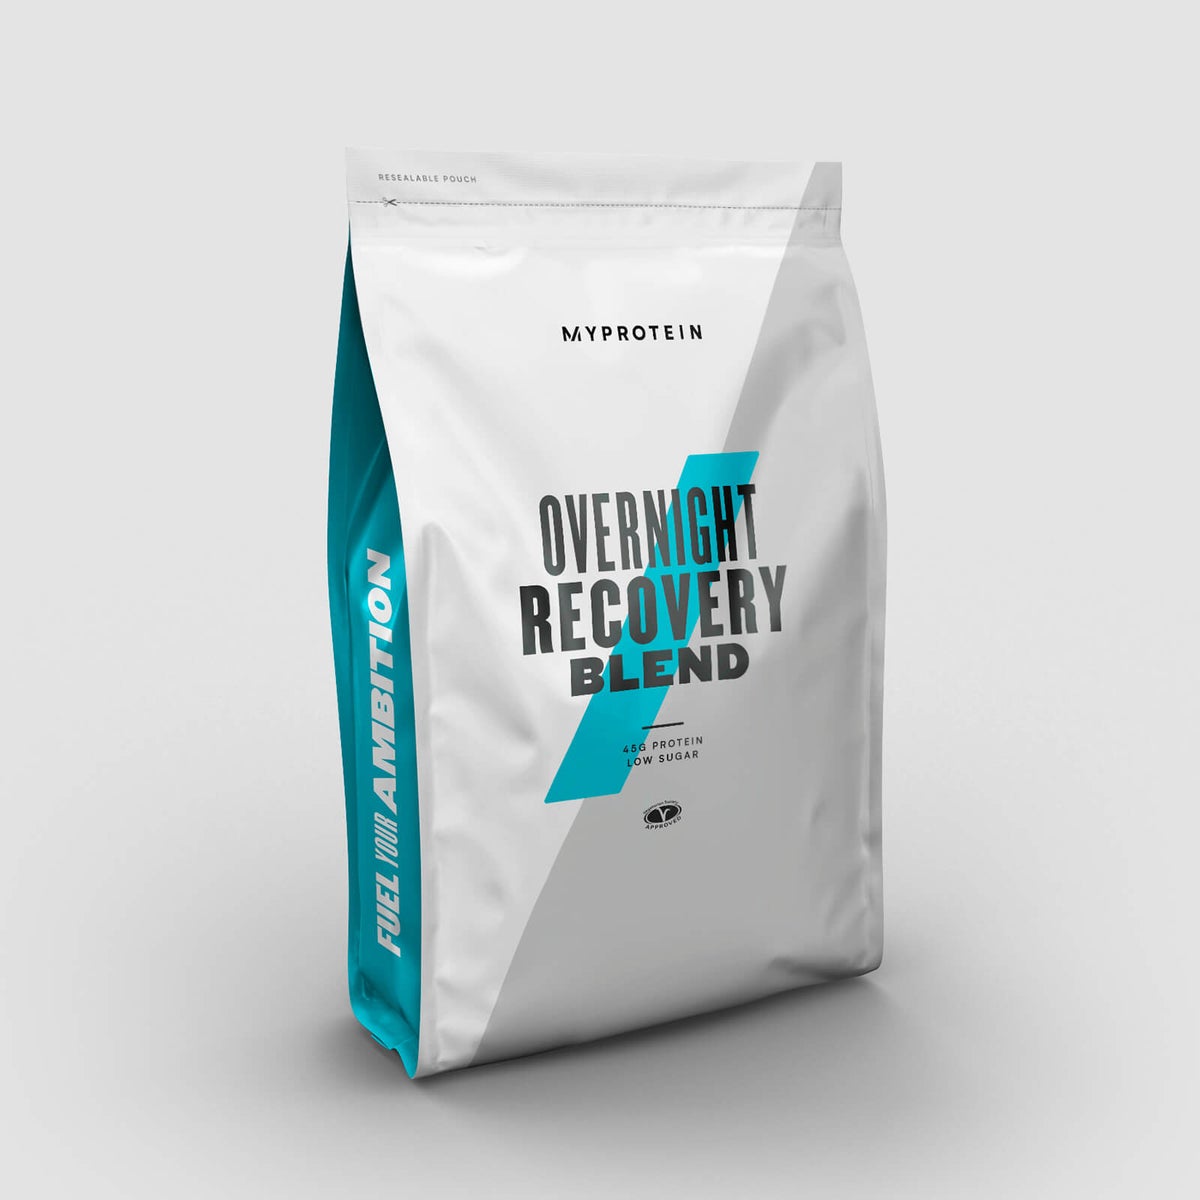 Overnight Recovery Blend